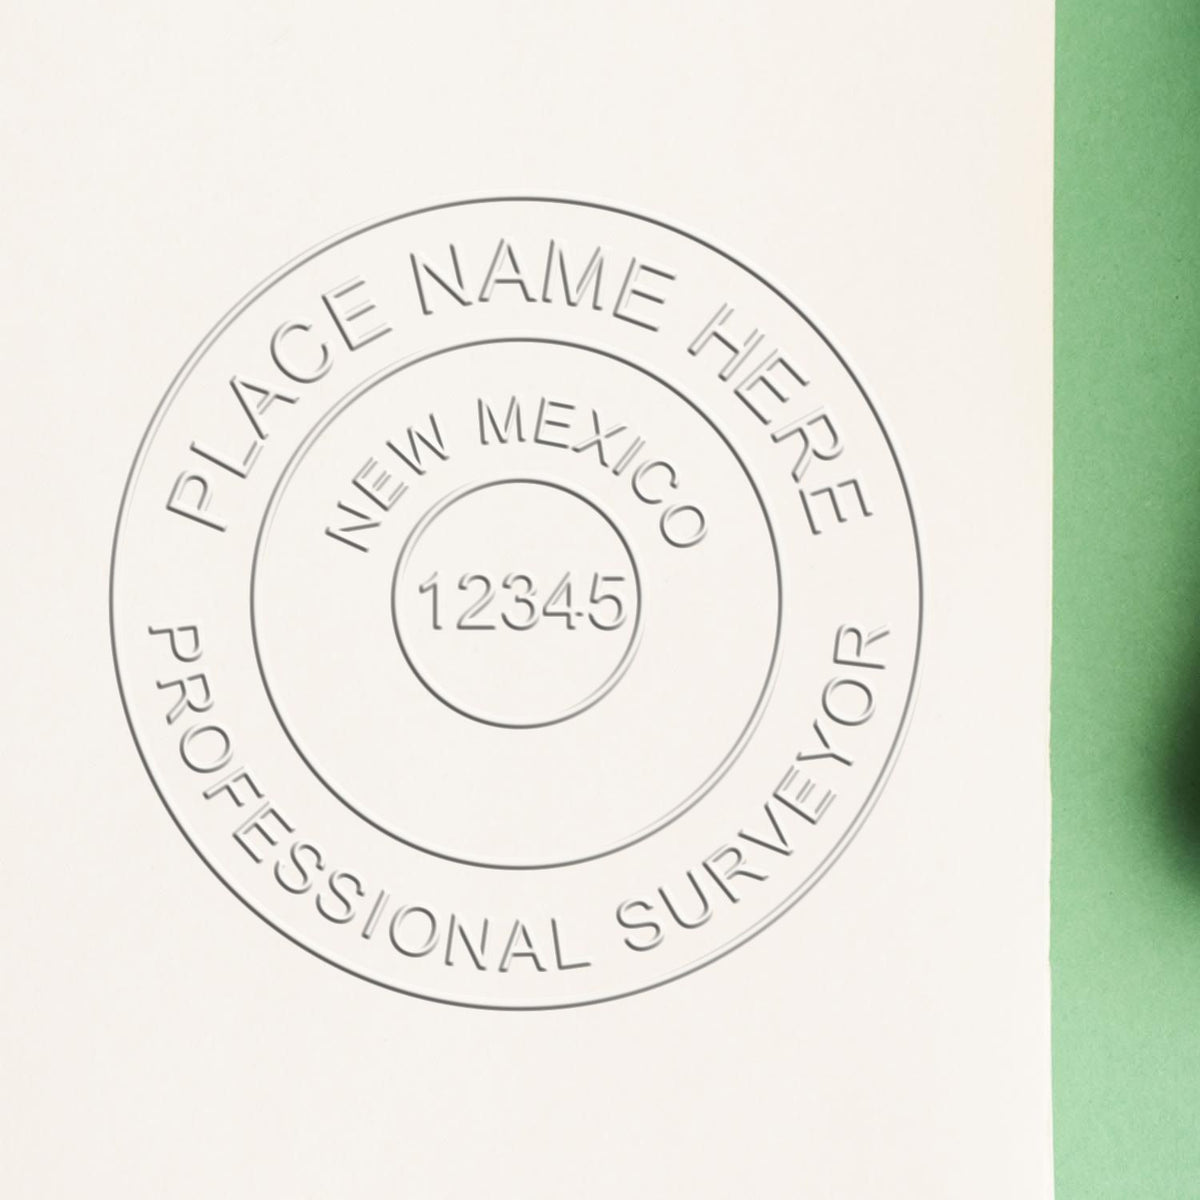 A photograph of the Hybrid New Mexico Land Surveyor Seal stamp impression reveals a vivid, professional image of the on paper.